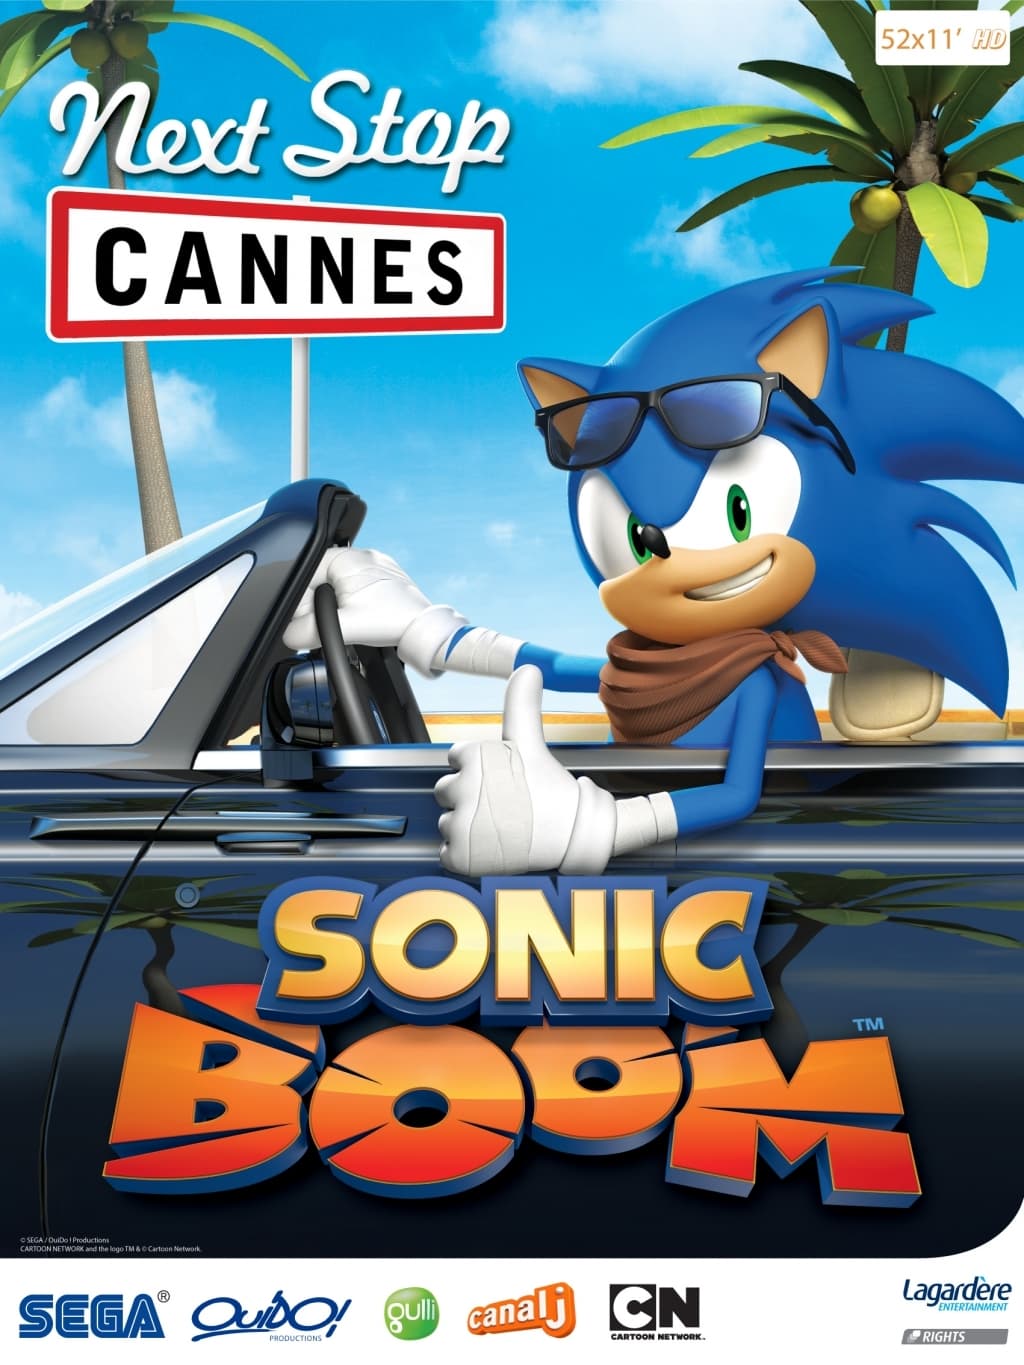 Sonic Boom Productions